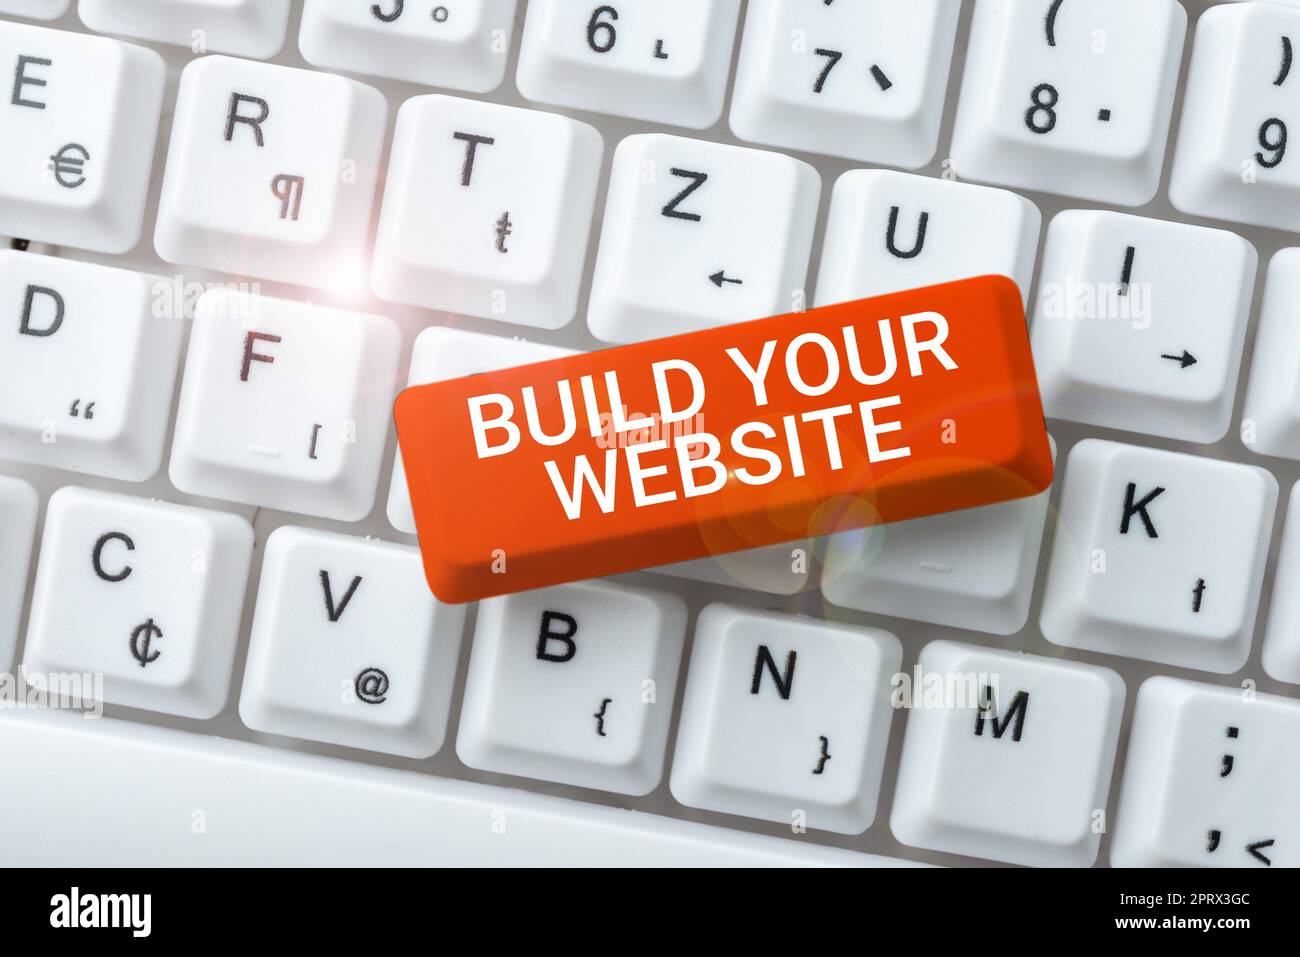 Sign displaying Build Your WebsiteSetting up an ecommerce system to market a business. Word for Setting up an ecommerce system to market a business Stock Photo